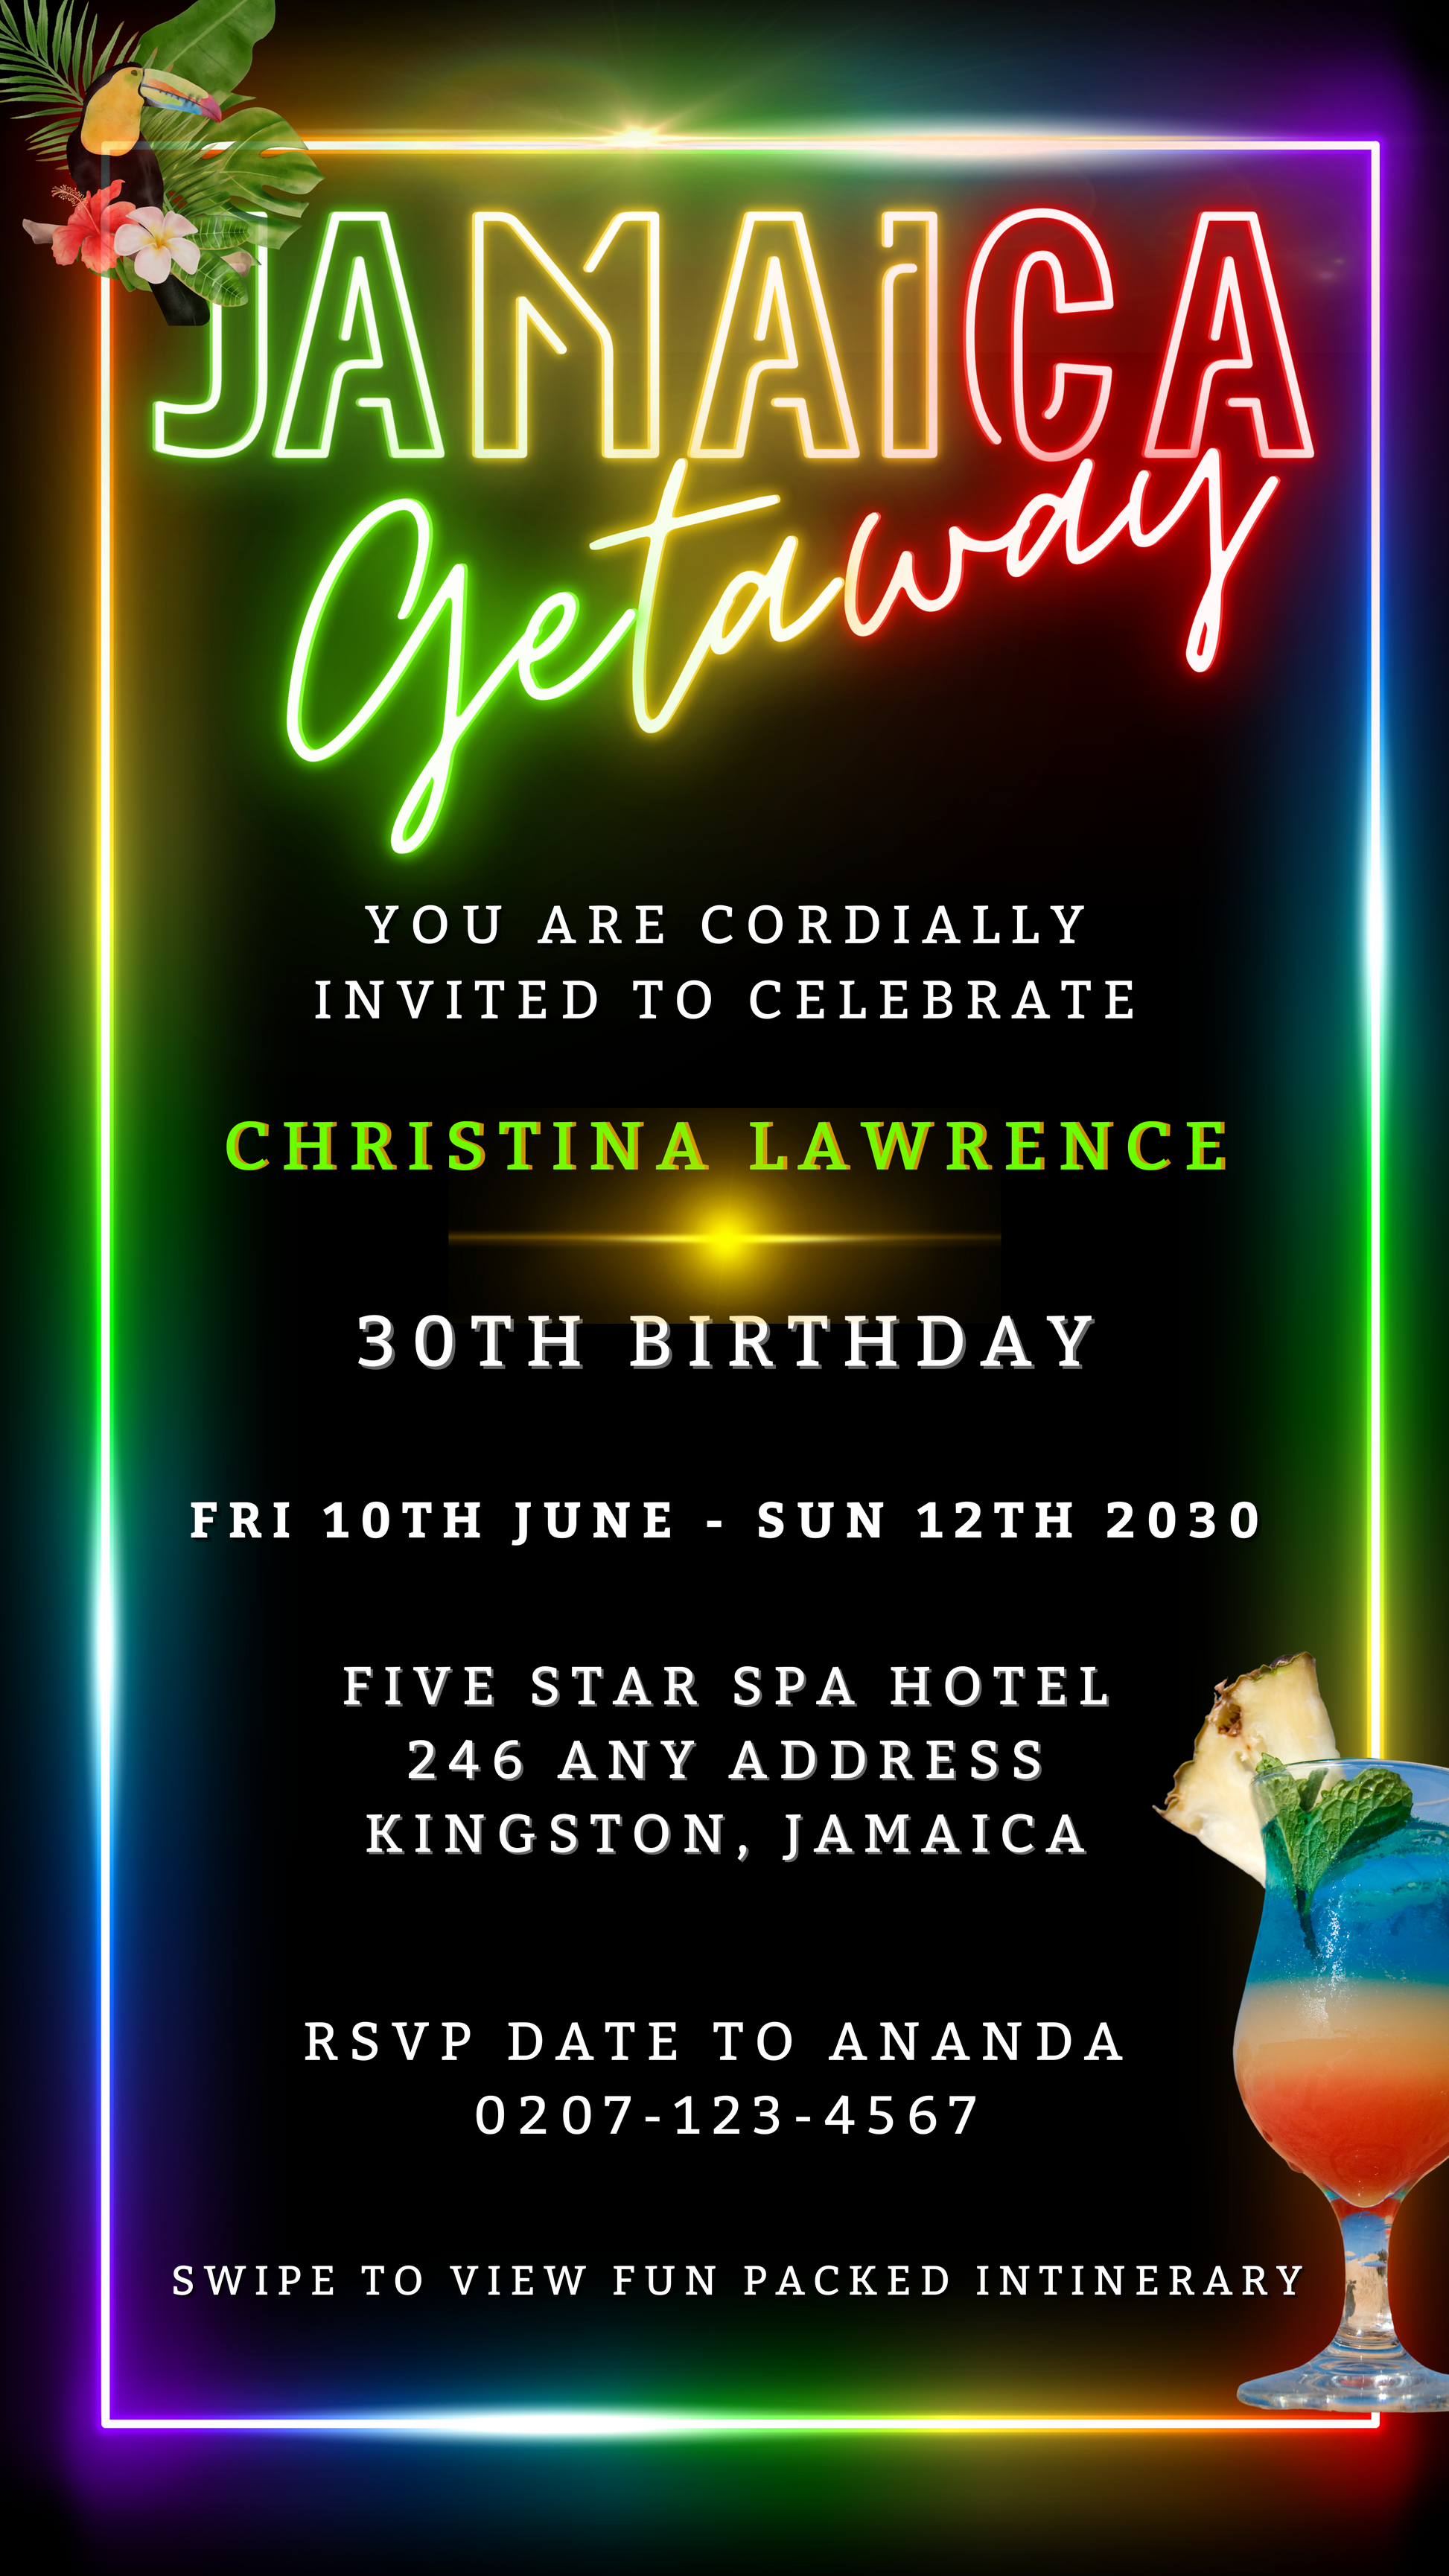 Jamaica Colourful Neon | Getaway Party Evite featuring a vibrant drink and customizable neon text, perfect for electronic invitations via Canva.